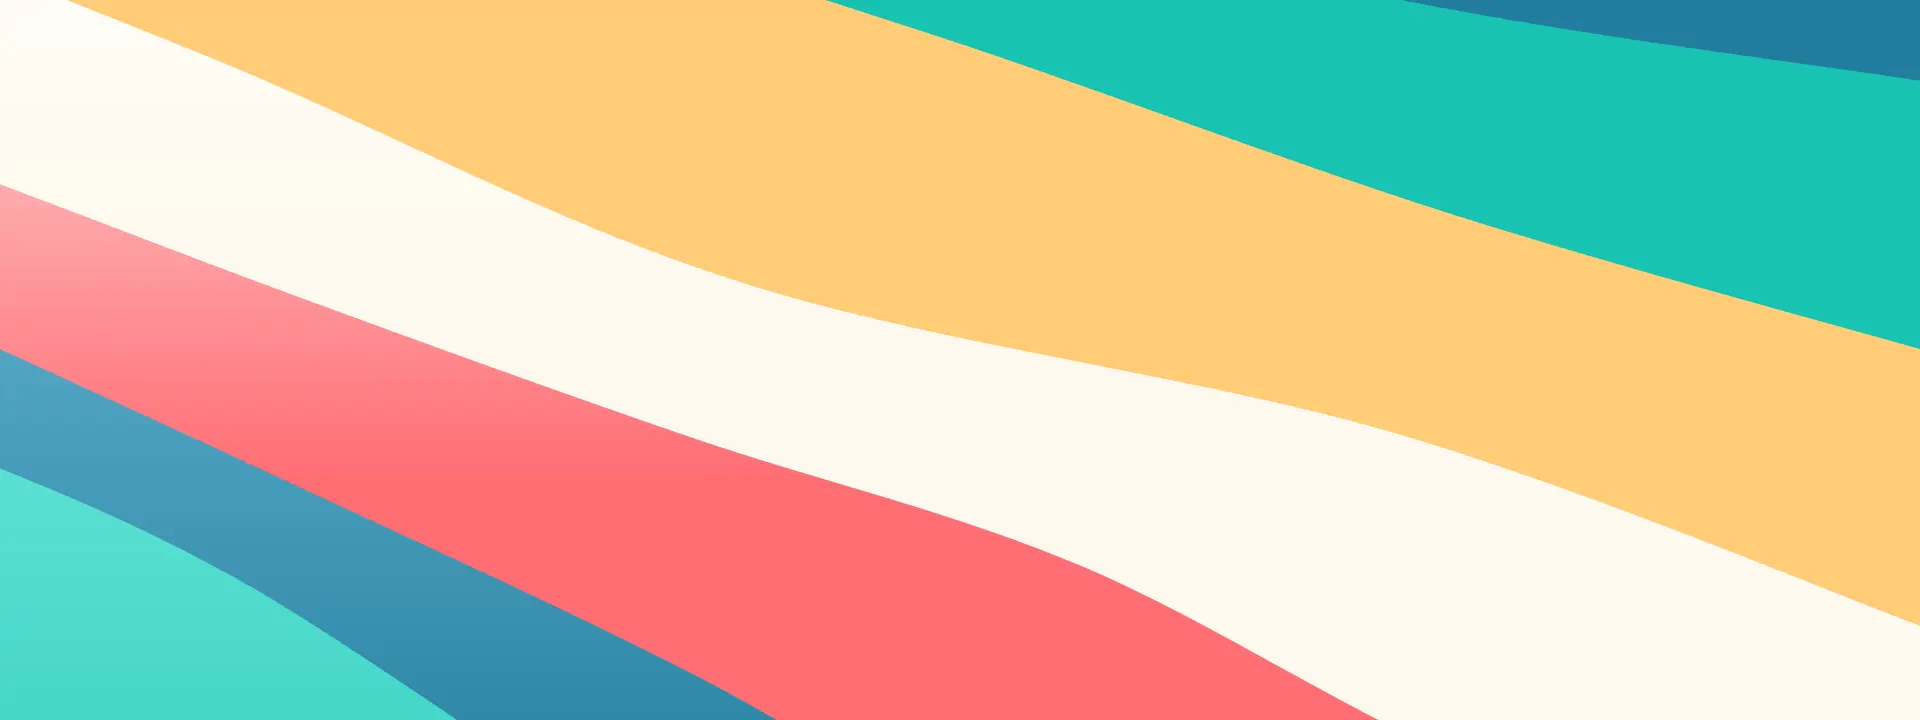 Background by Creatica - Small Sur from Creatica: A Vibrant Touch Inspired by macOS Big Sur